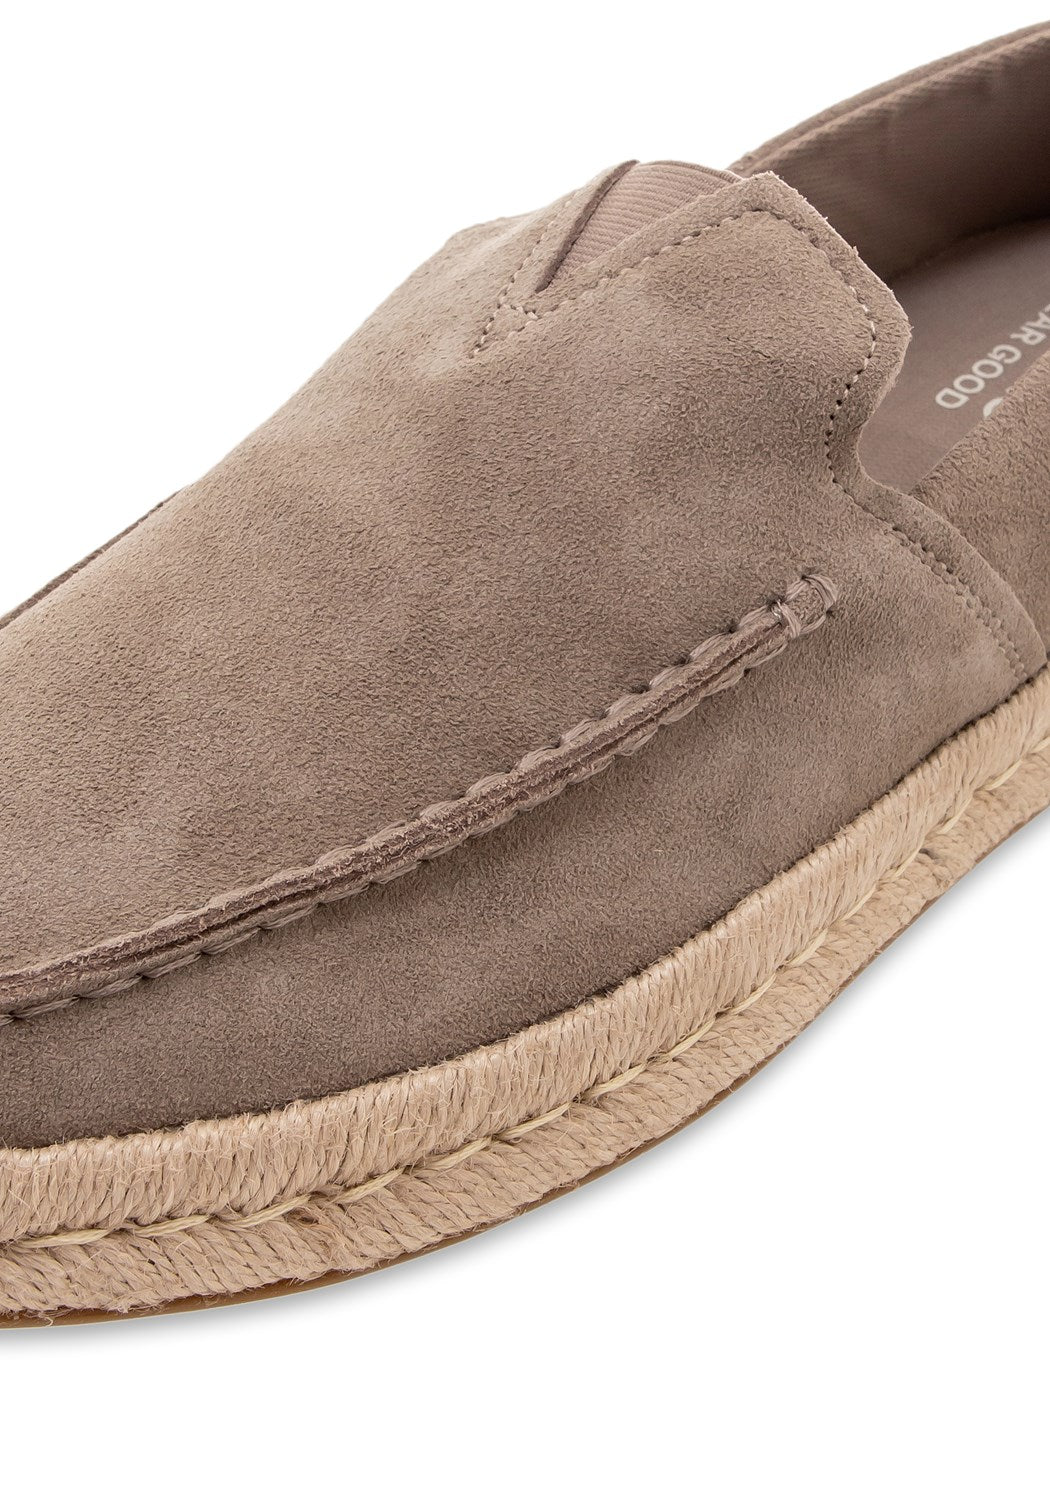 Alonso Loafer Rope taupe | Bildmaterial bereitgestellt von SHOES.PLEASE.